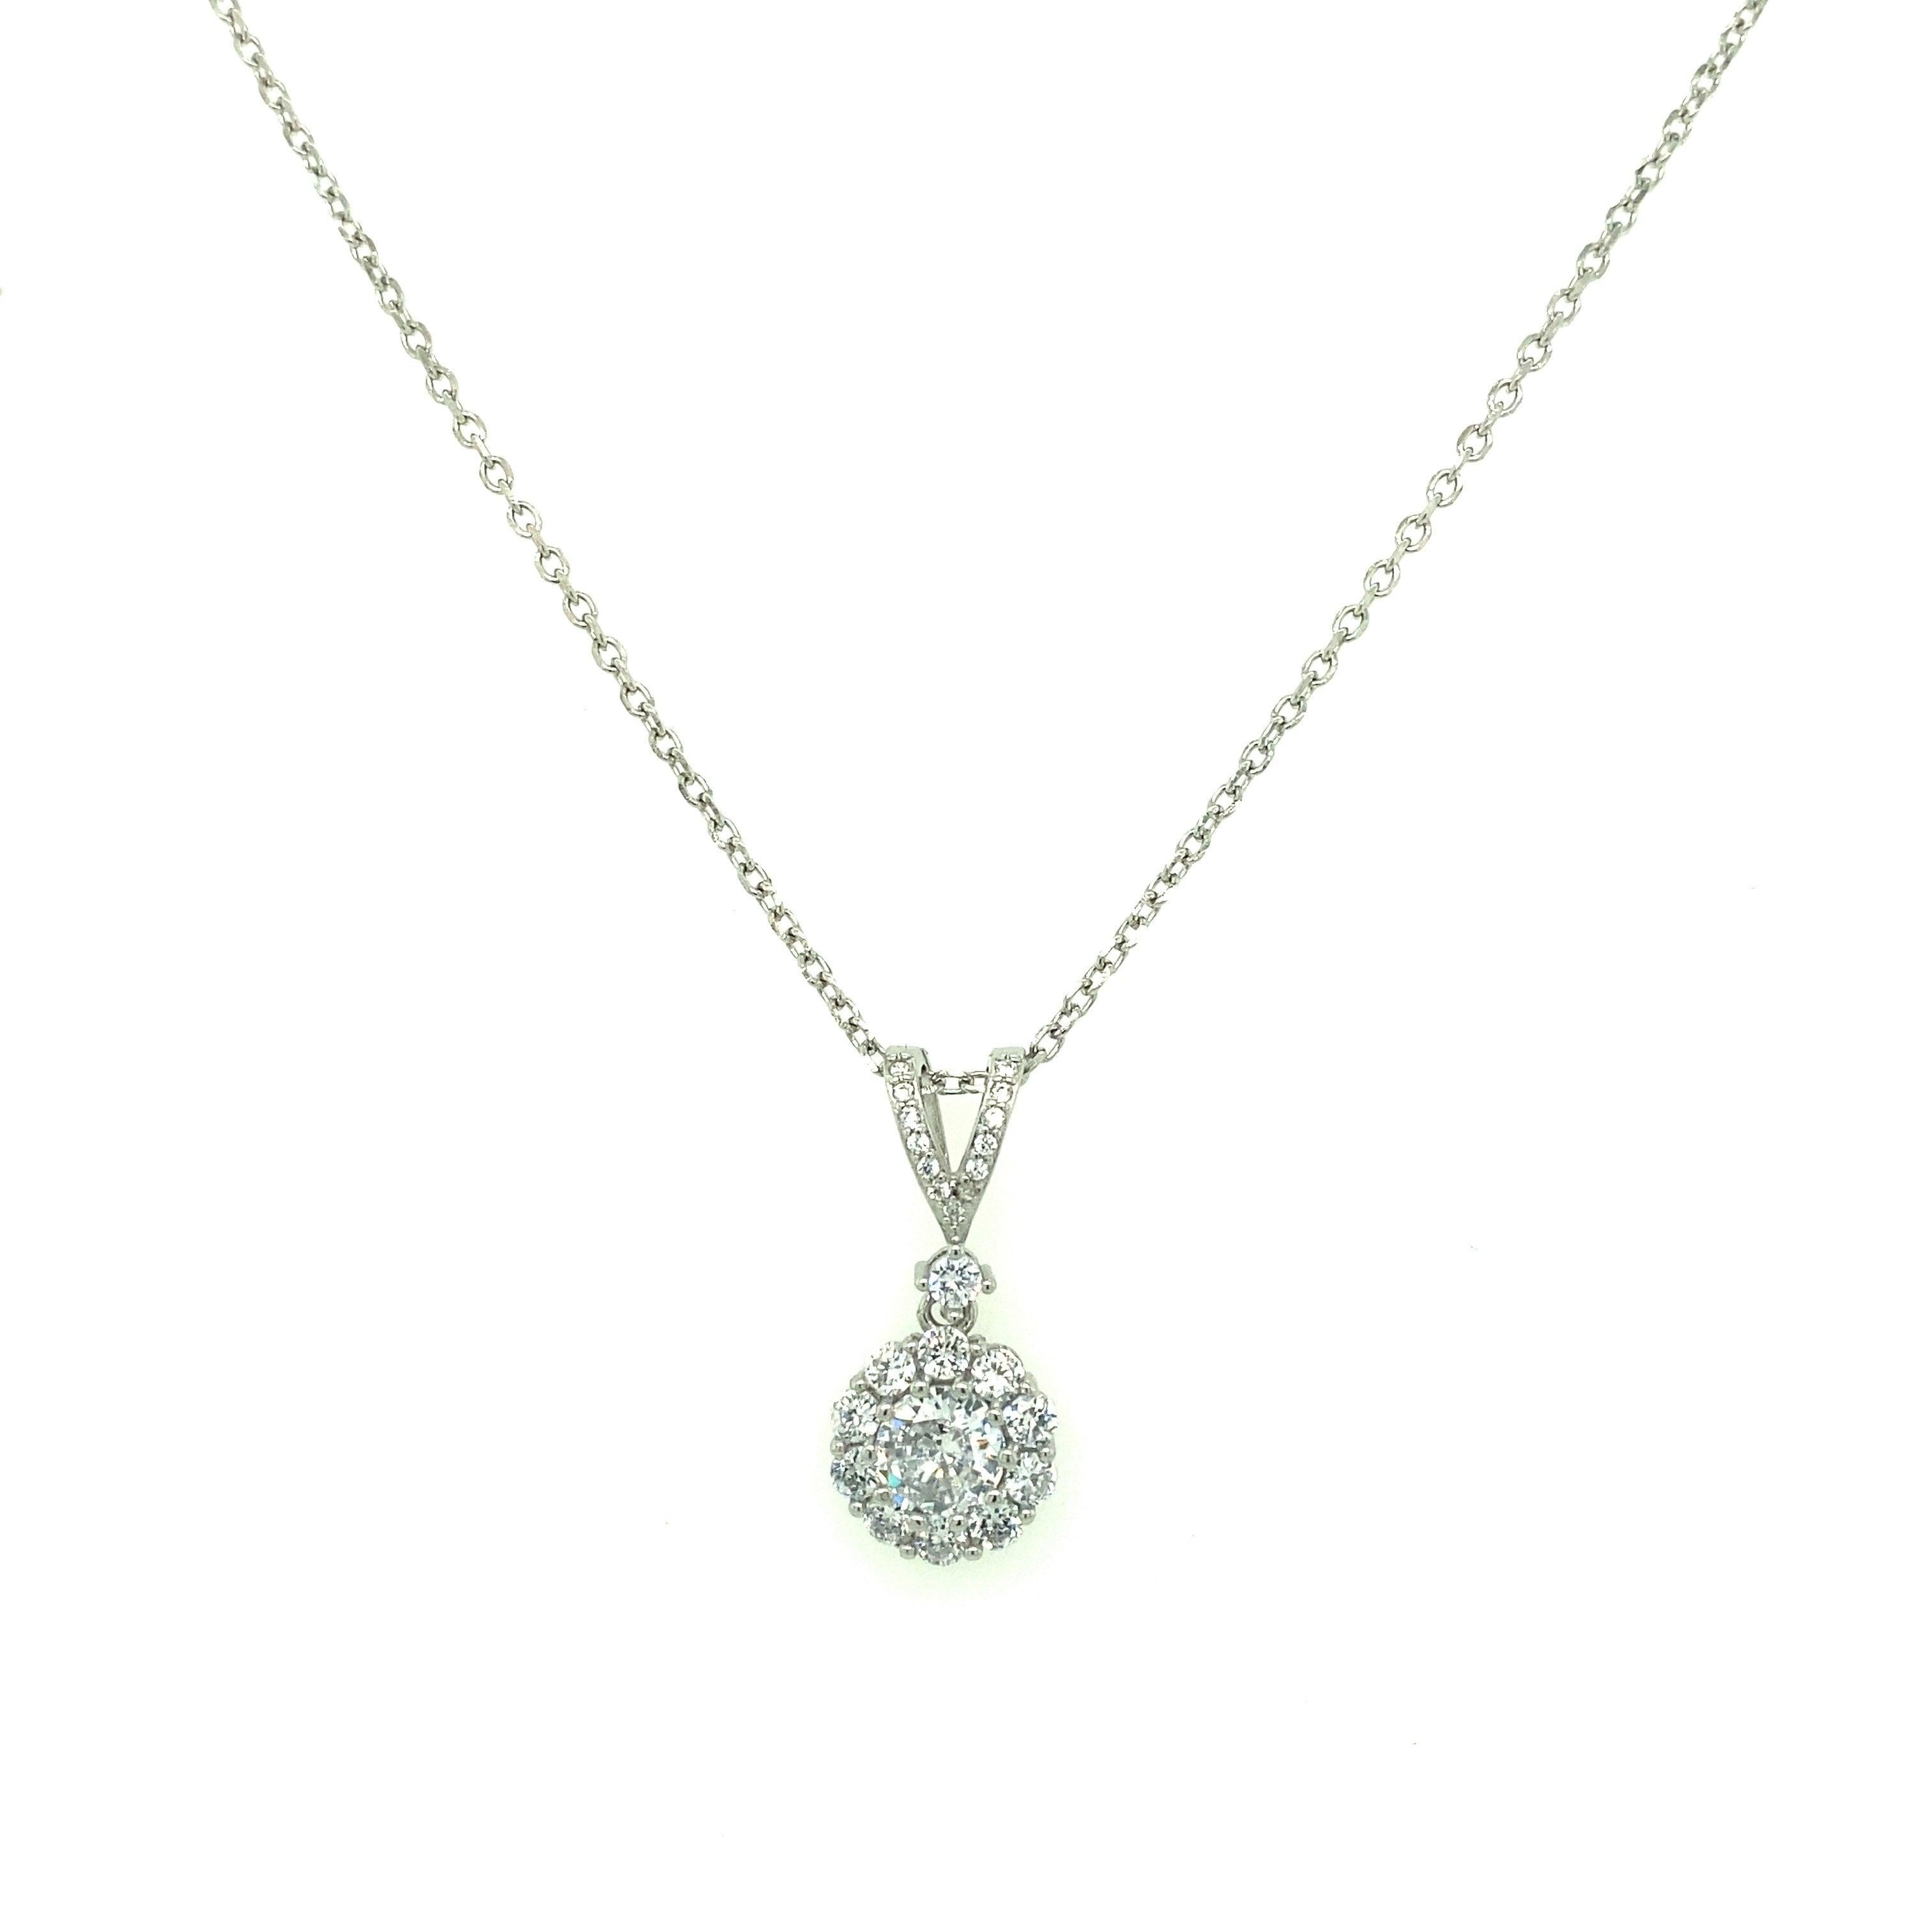 Asfour-Crystal-Silver-accessoriesNecklace-N1710-925-Sterling-Silver